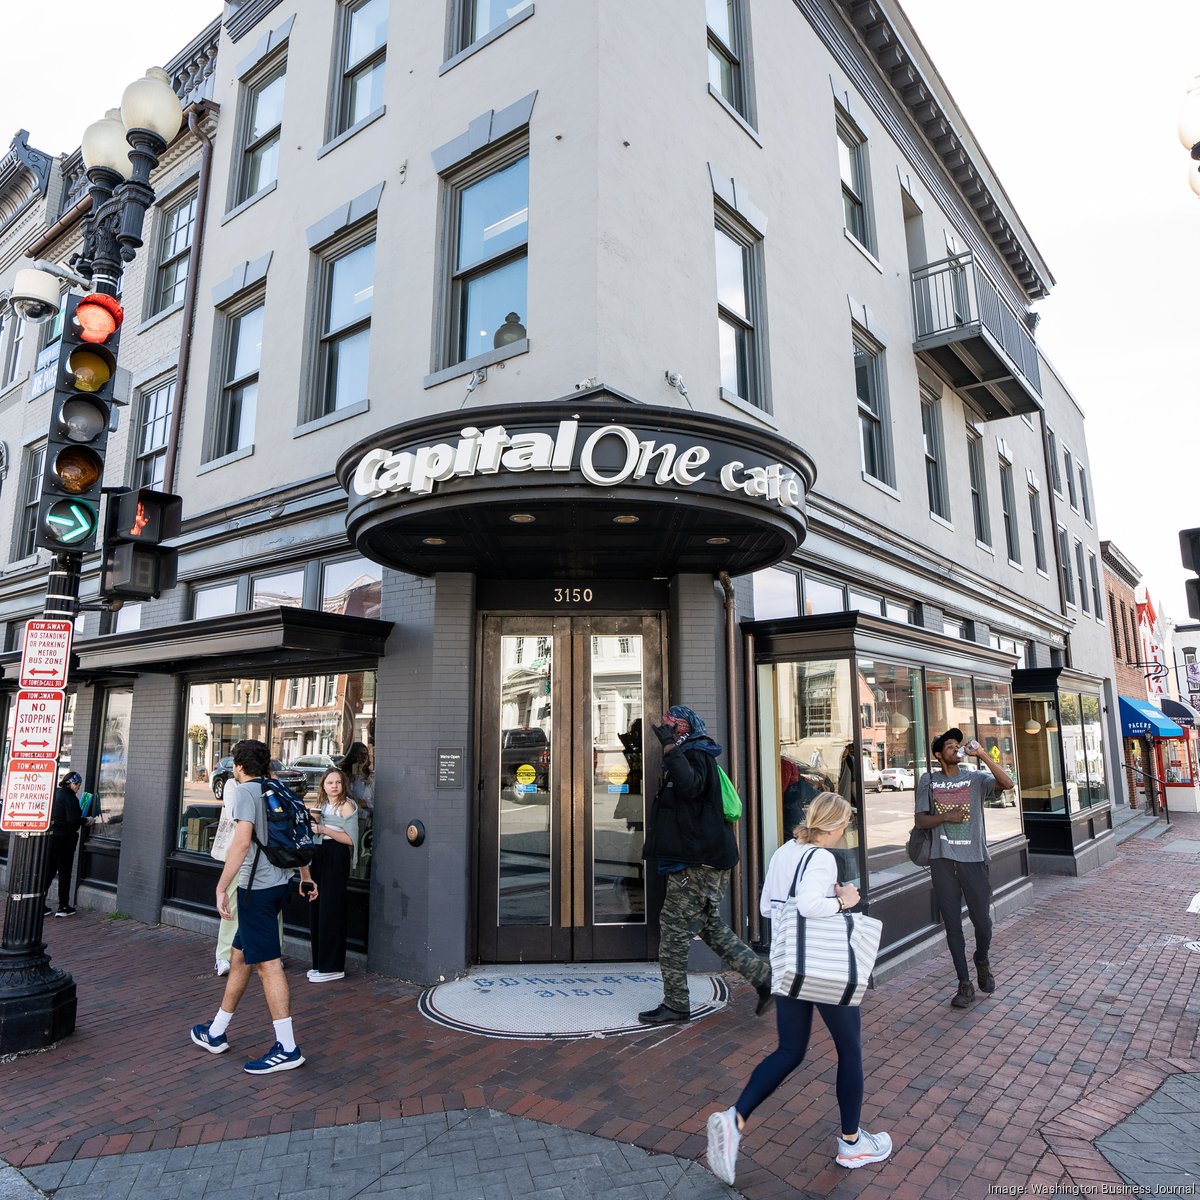 Capital One agrees to run credit card operation for Neiman Marcus